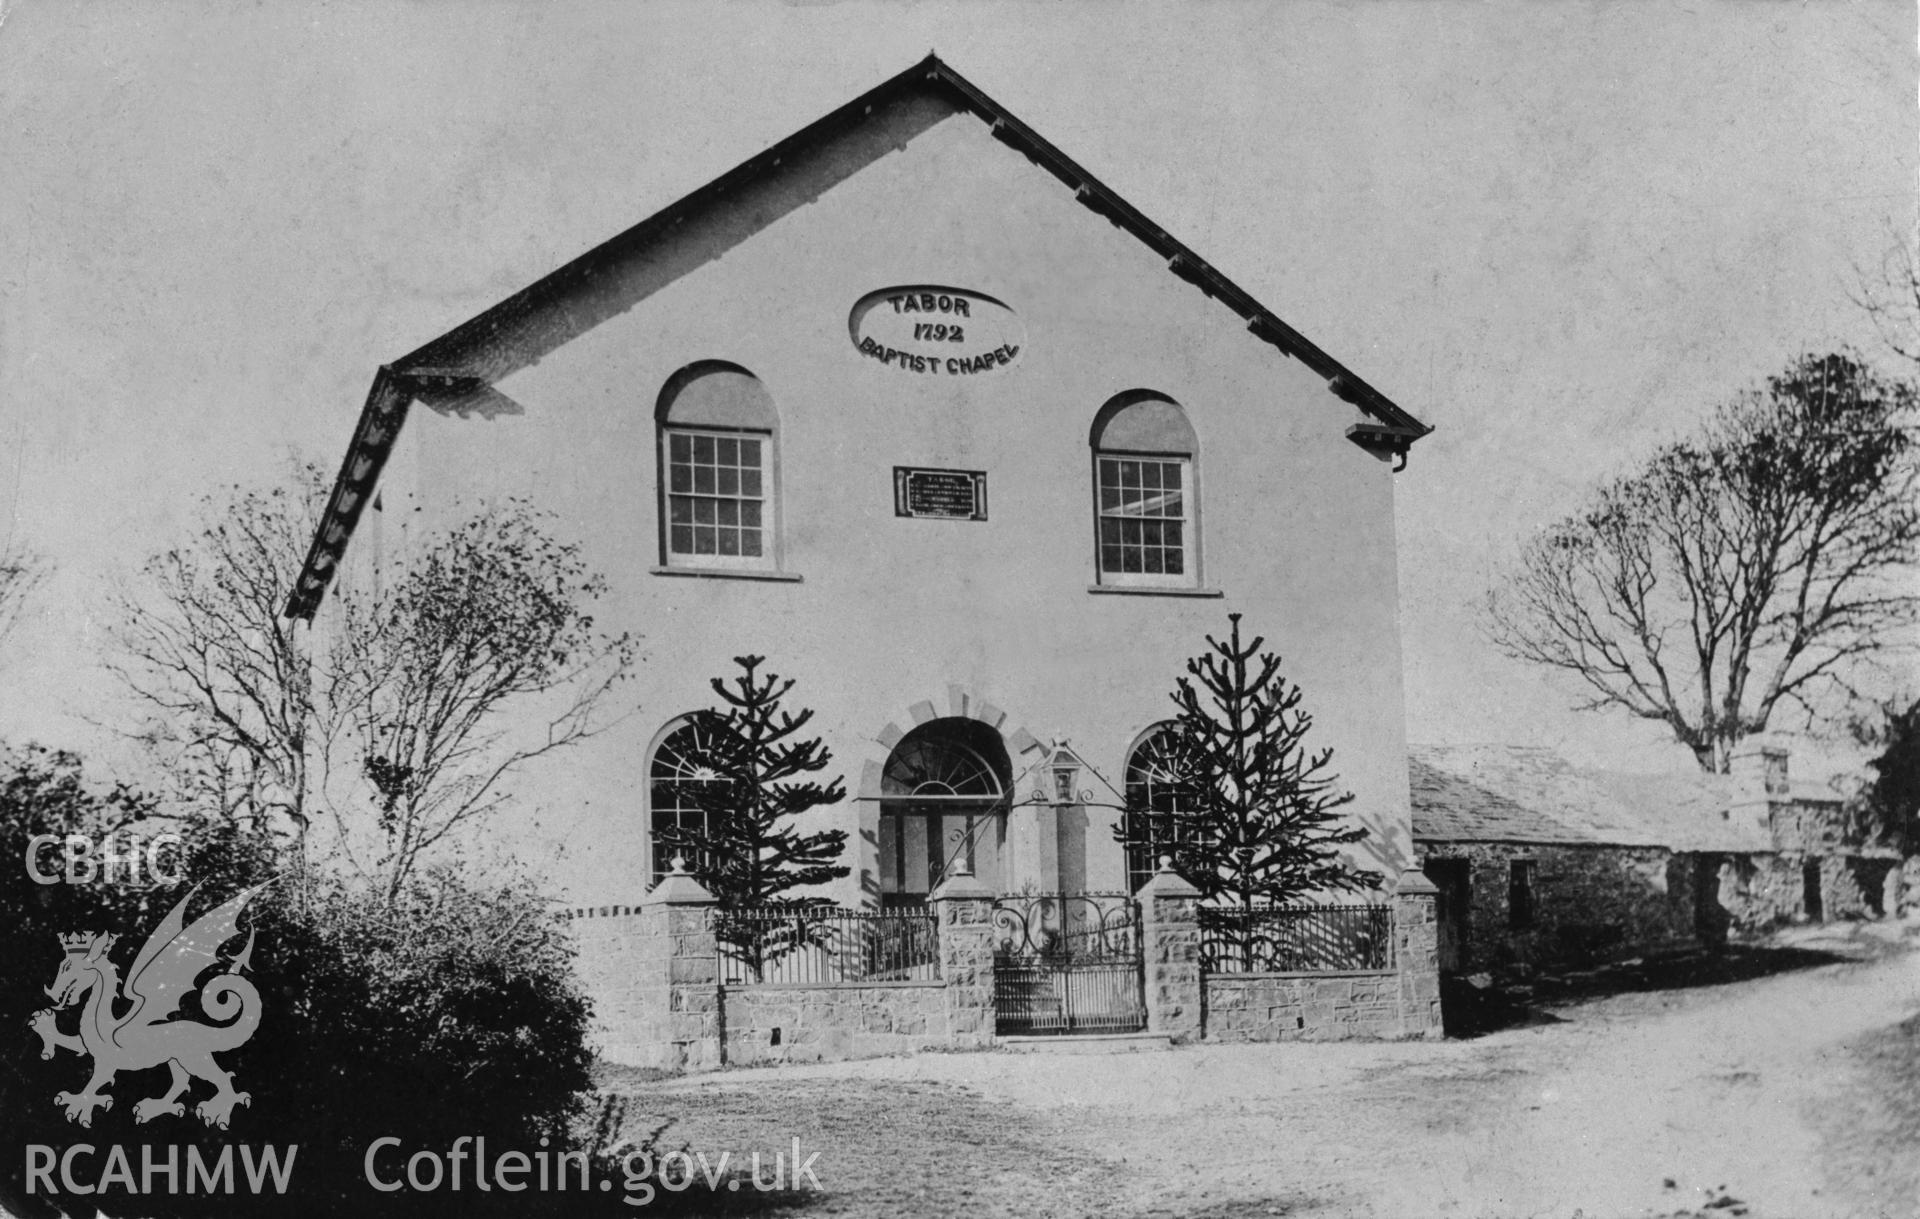 Black and white print of Tabor Baptist Chapel, copied from a postcard loaned by Thomas Lloyd. Negative held.